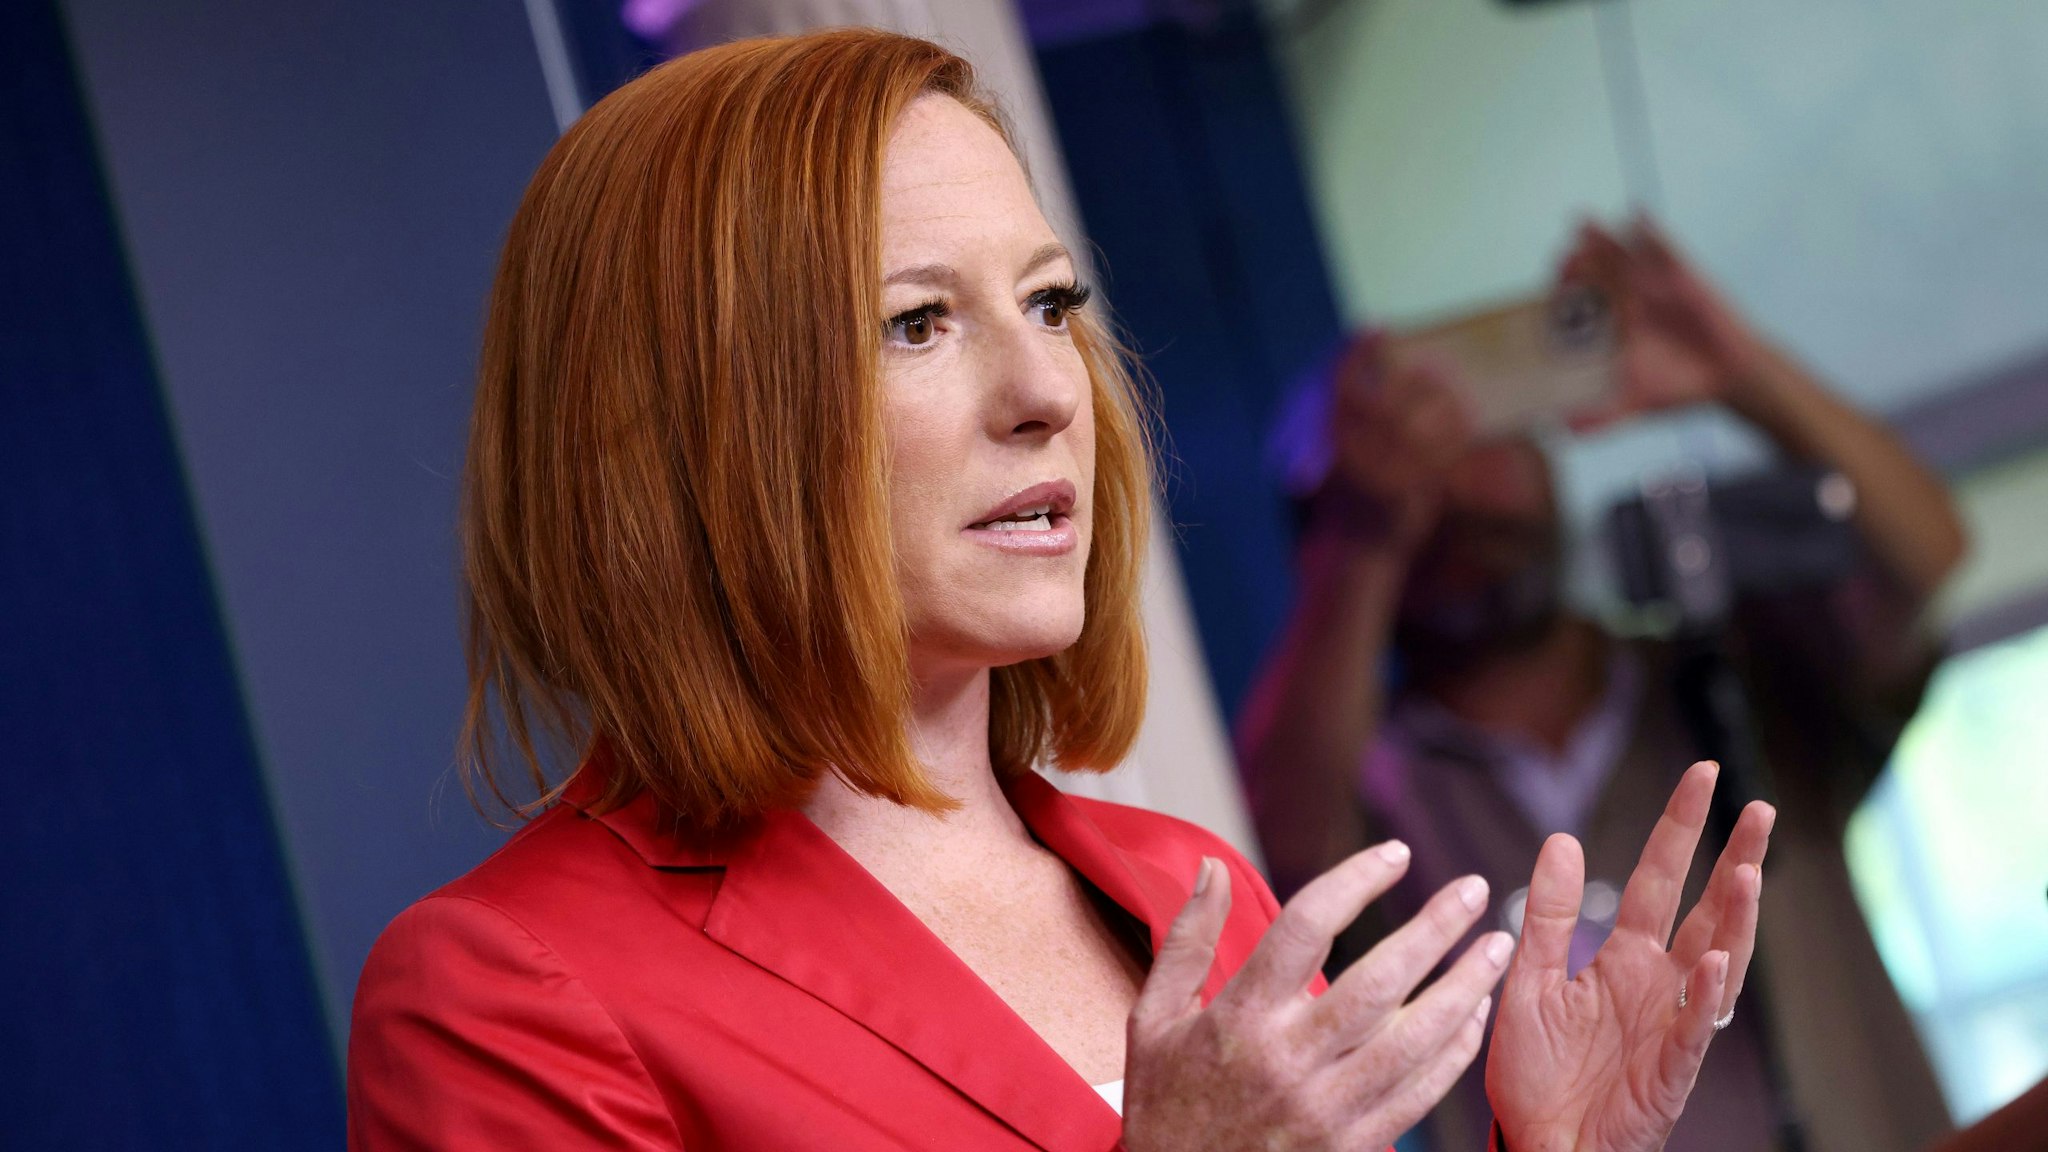 WASHINGTON, DC - JUNE 28: White House press secretary Jen Psaki answers questions during her daily briefing on June 28, 2021 in Washington, DC. Psaki answered a range of questions related to pending infrastructure legislation and other topics.